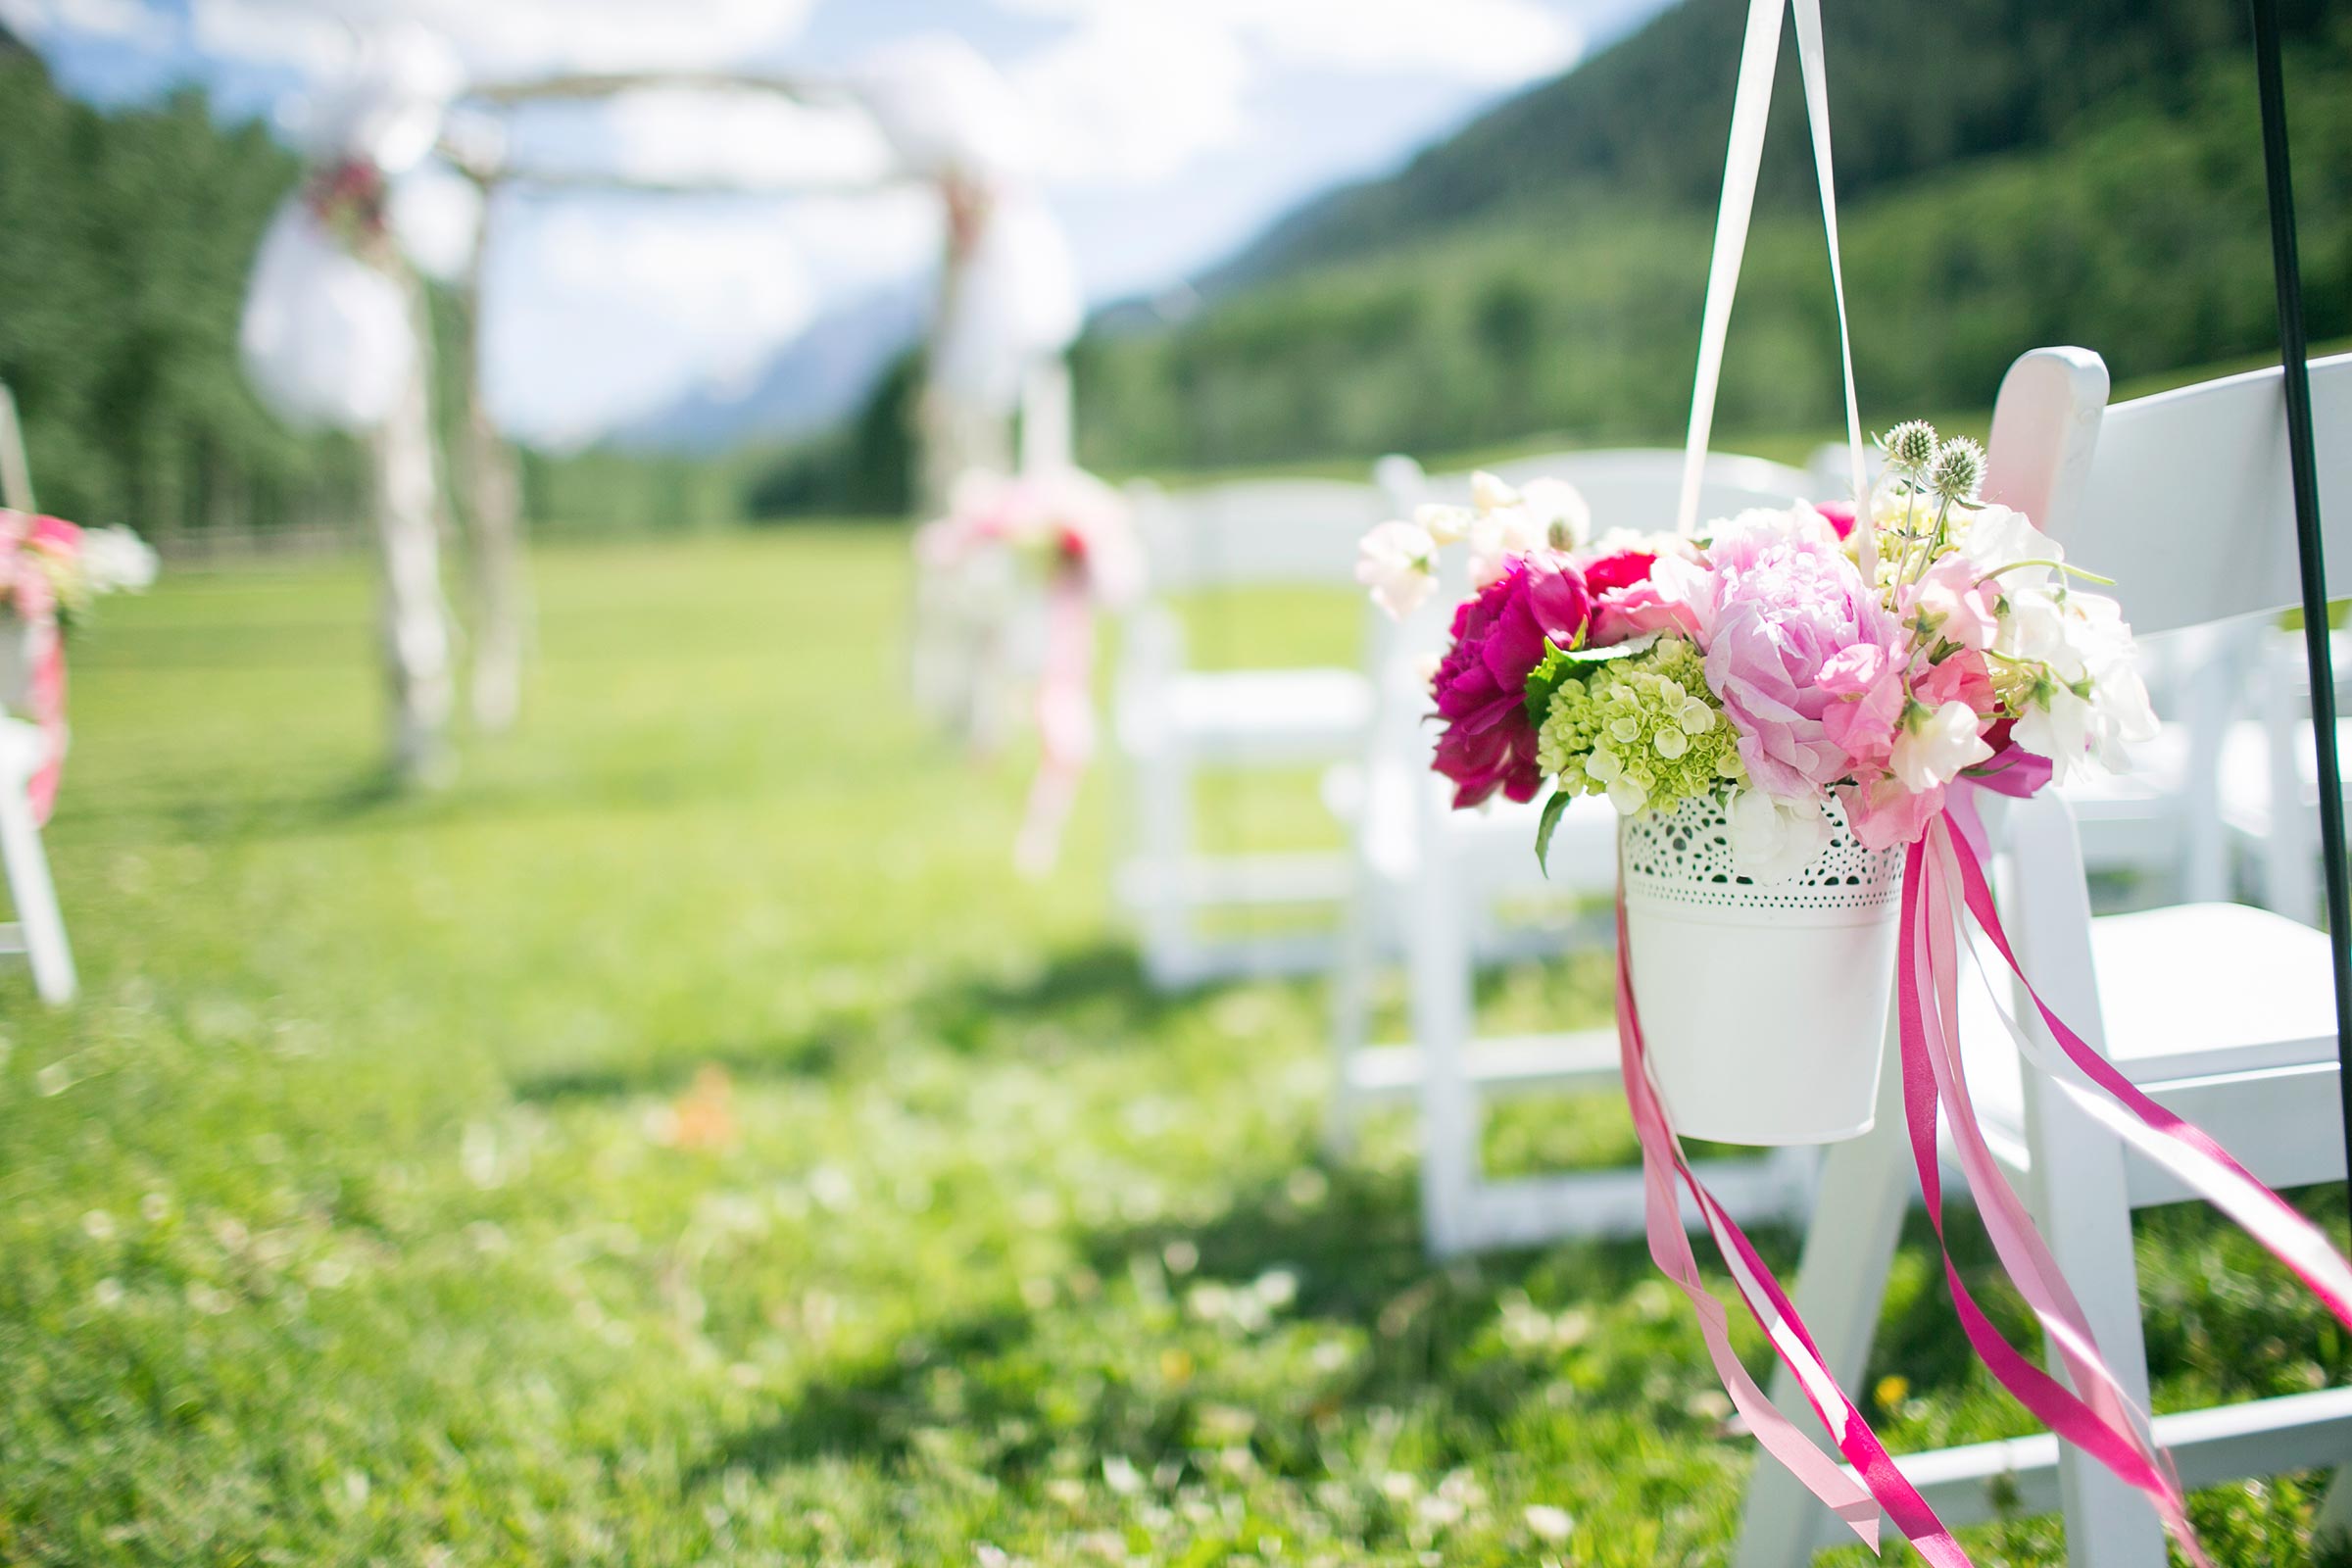 Planning A Summer Wedding Don't Forget These 5 Things For Your Reception